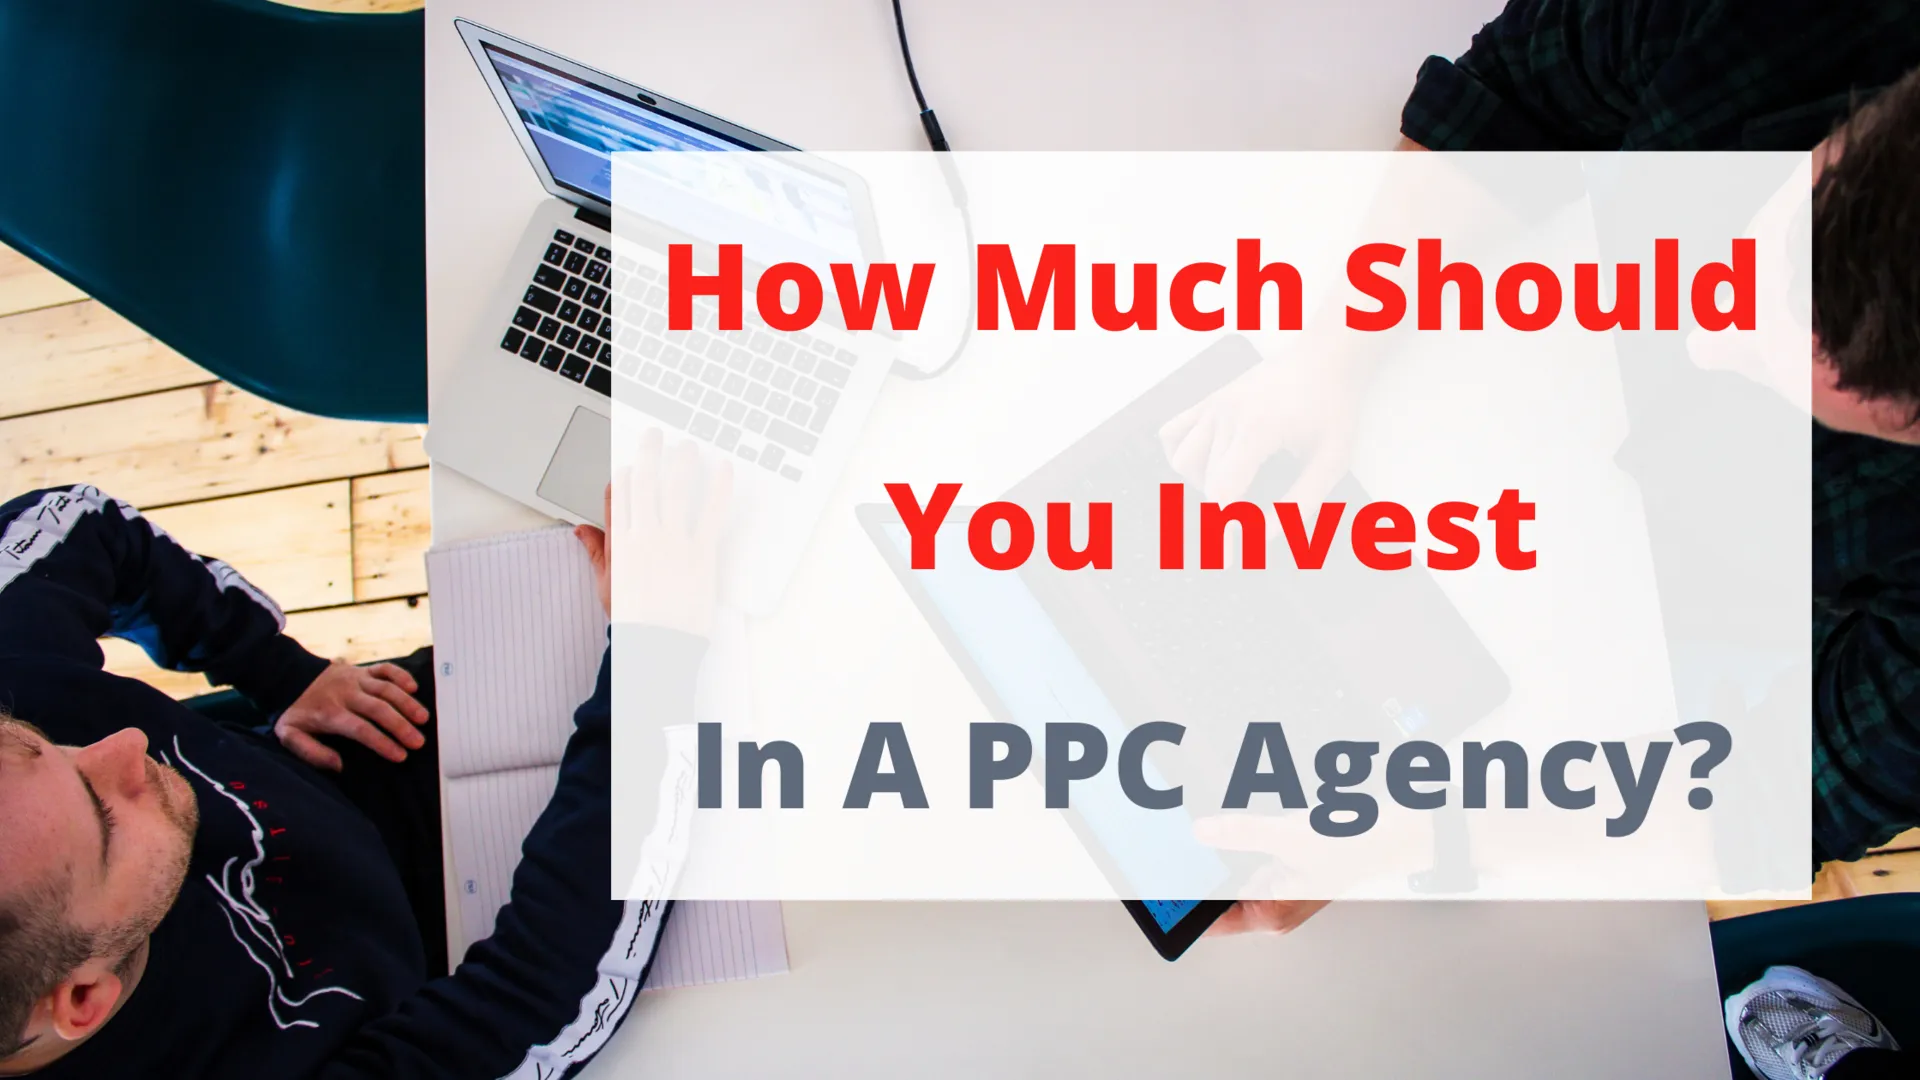 How Much Should You Invest In A PPC Agency?